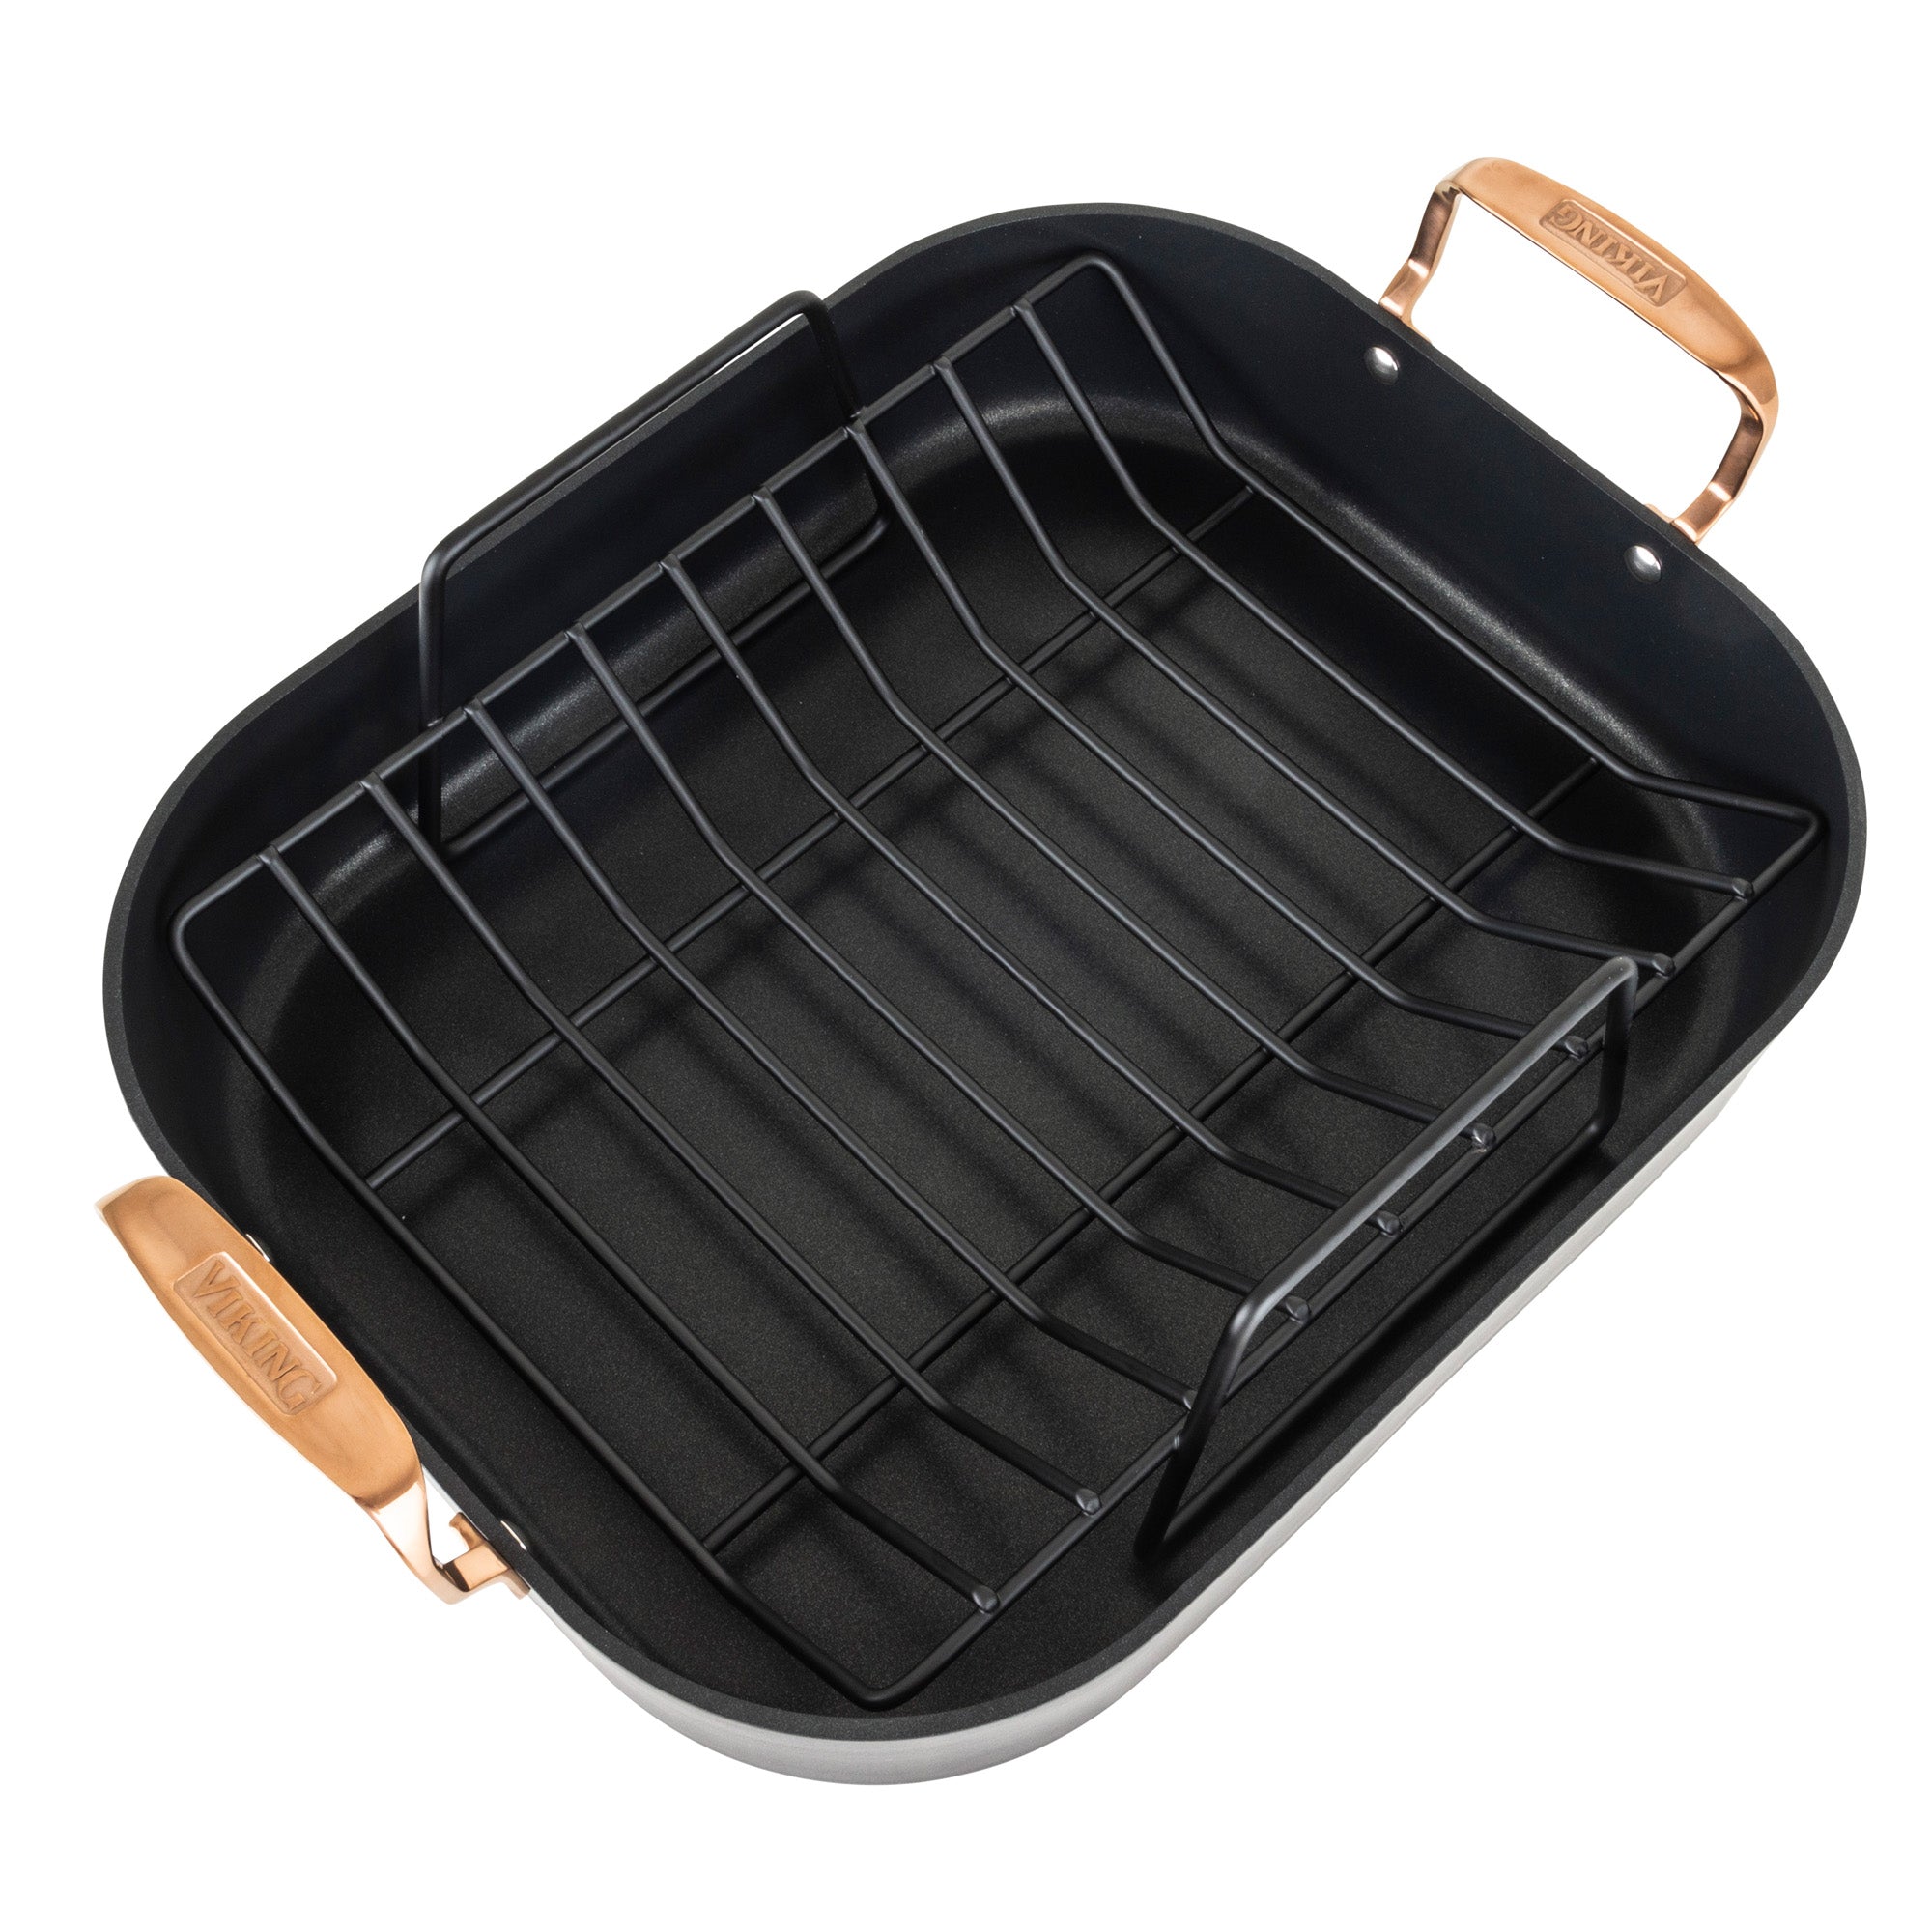 Viking Nonstick Roasting Rack for 13-inch x 16-inch Roasters